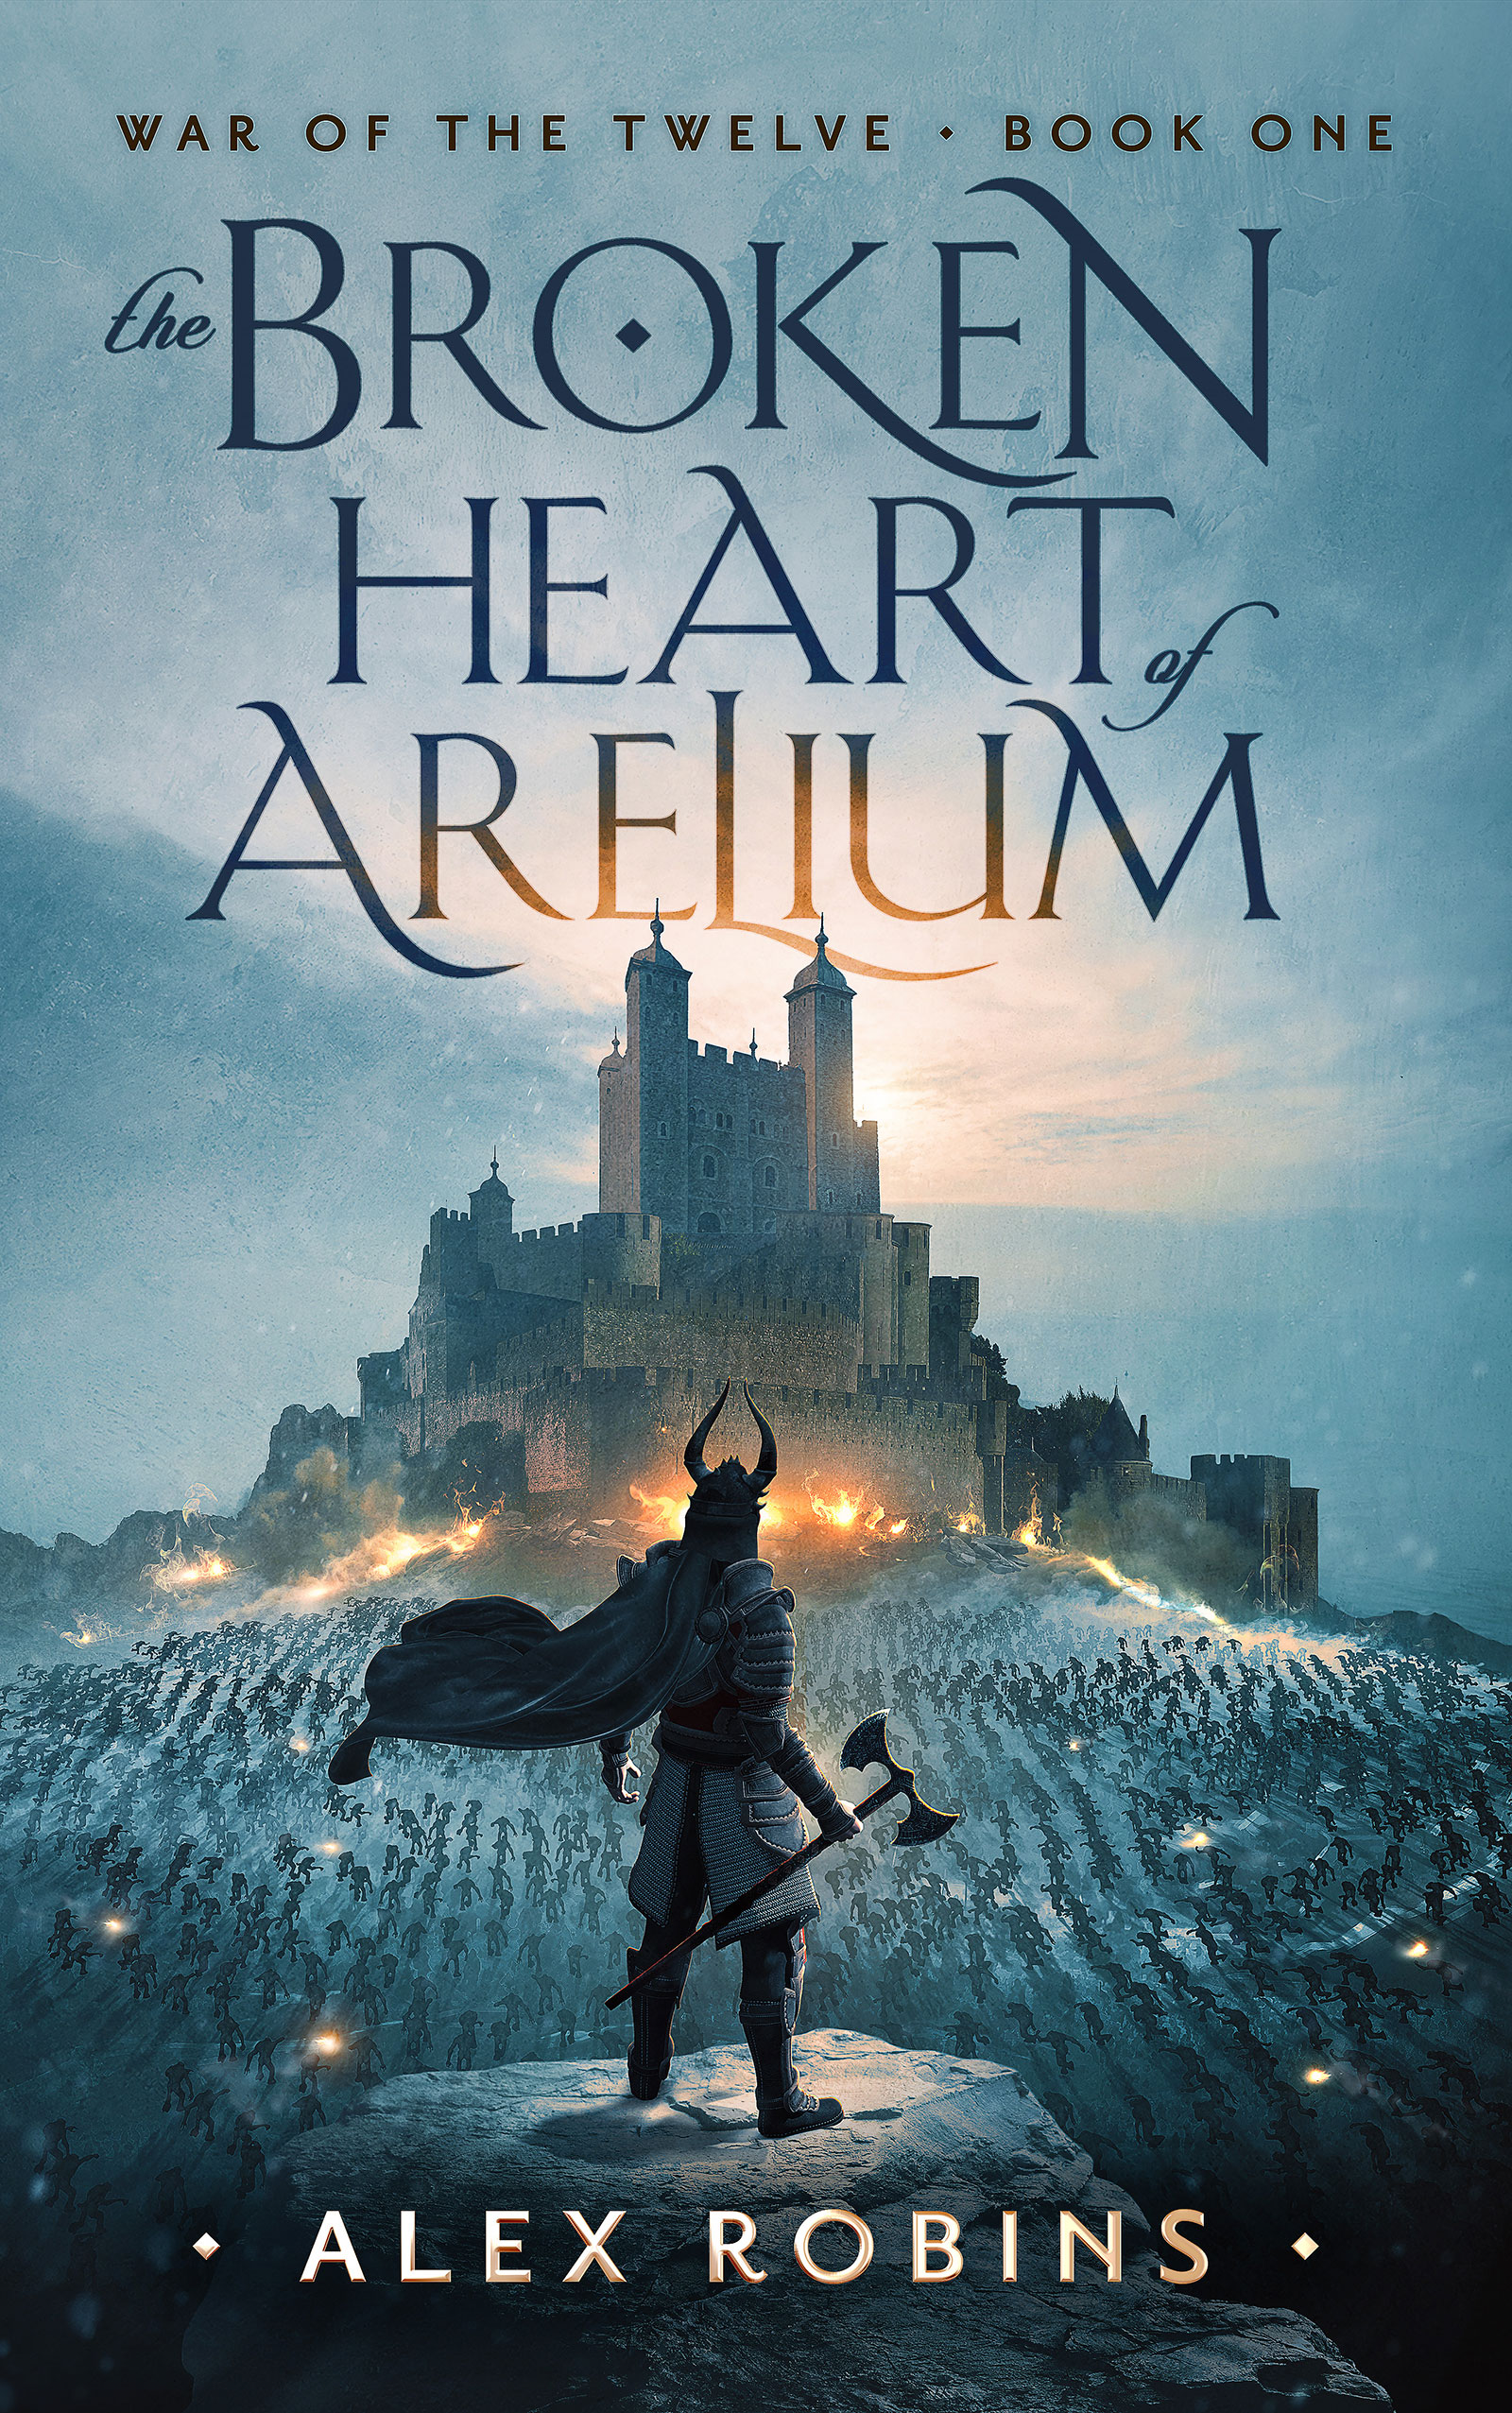 FREE: The Broken Heart of Arelium by Alex Robins